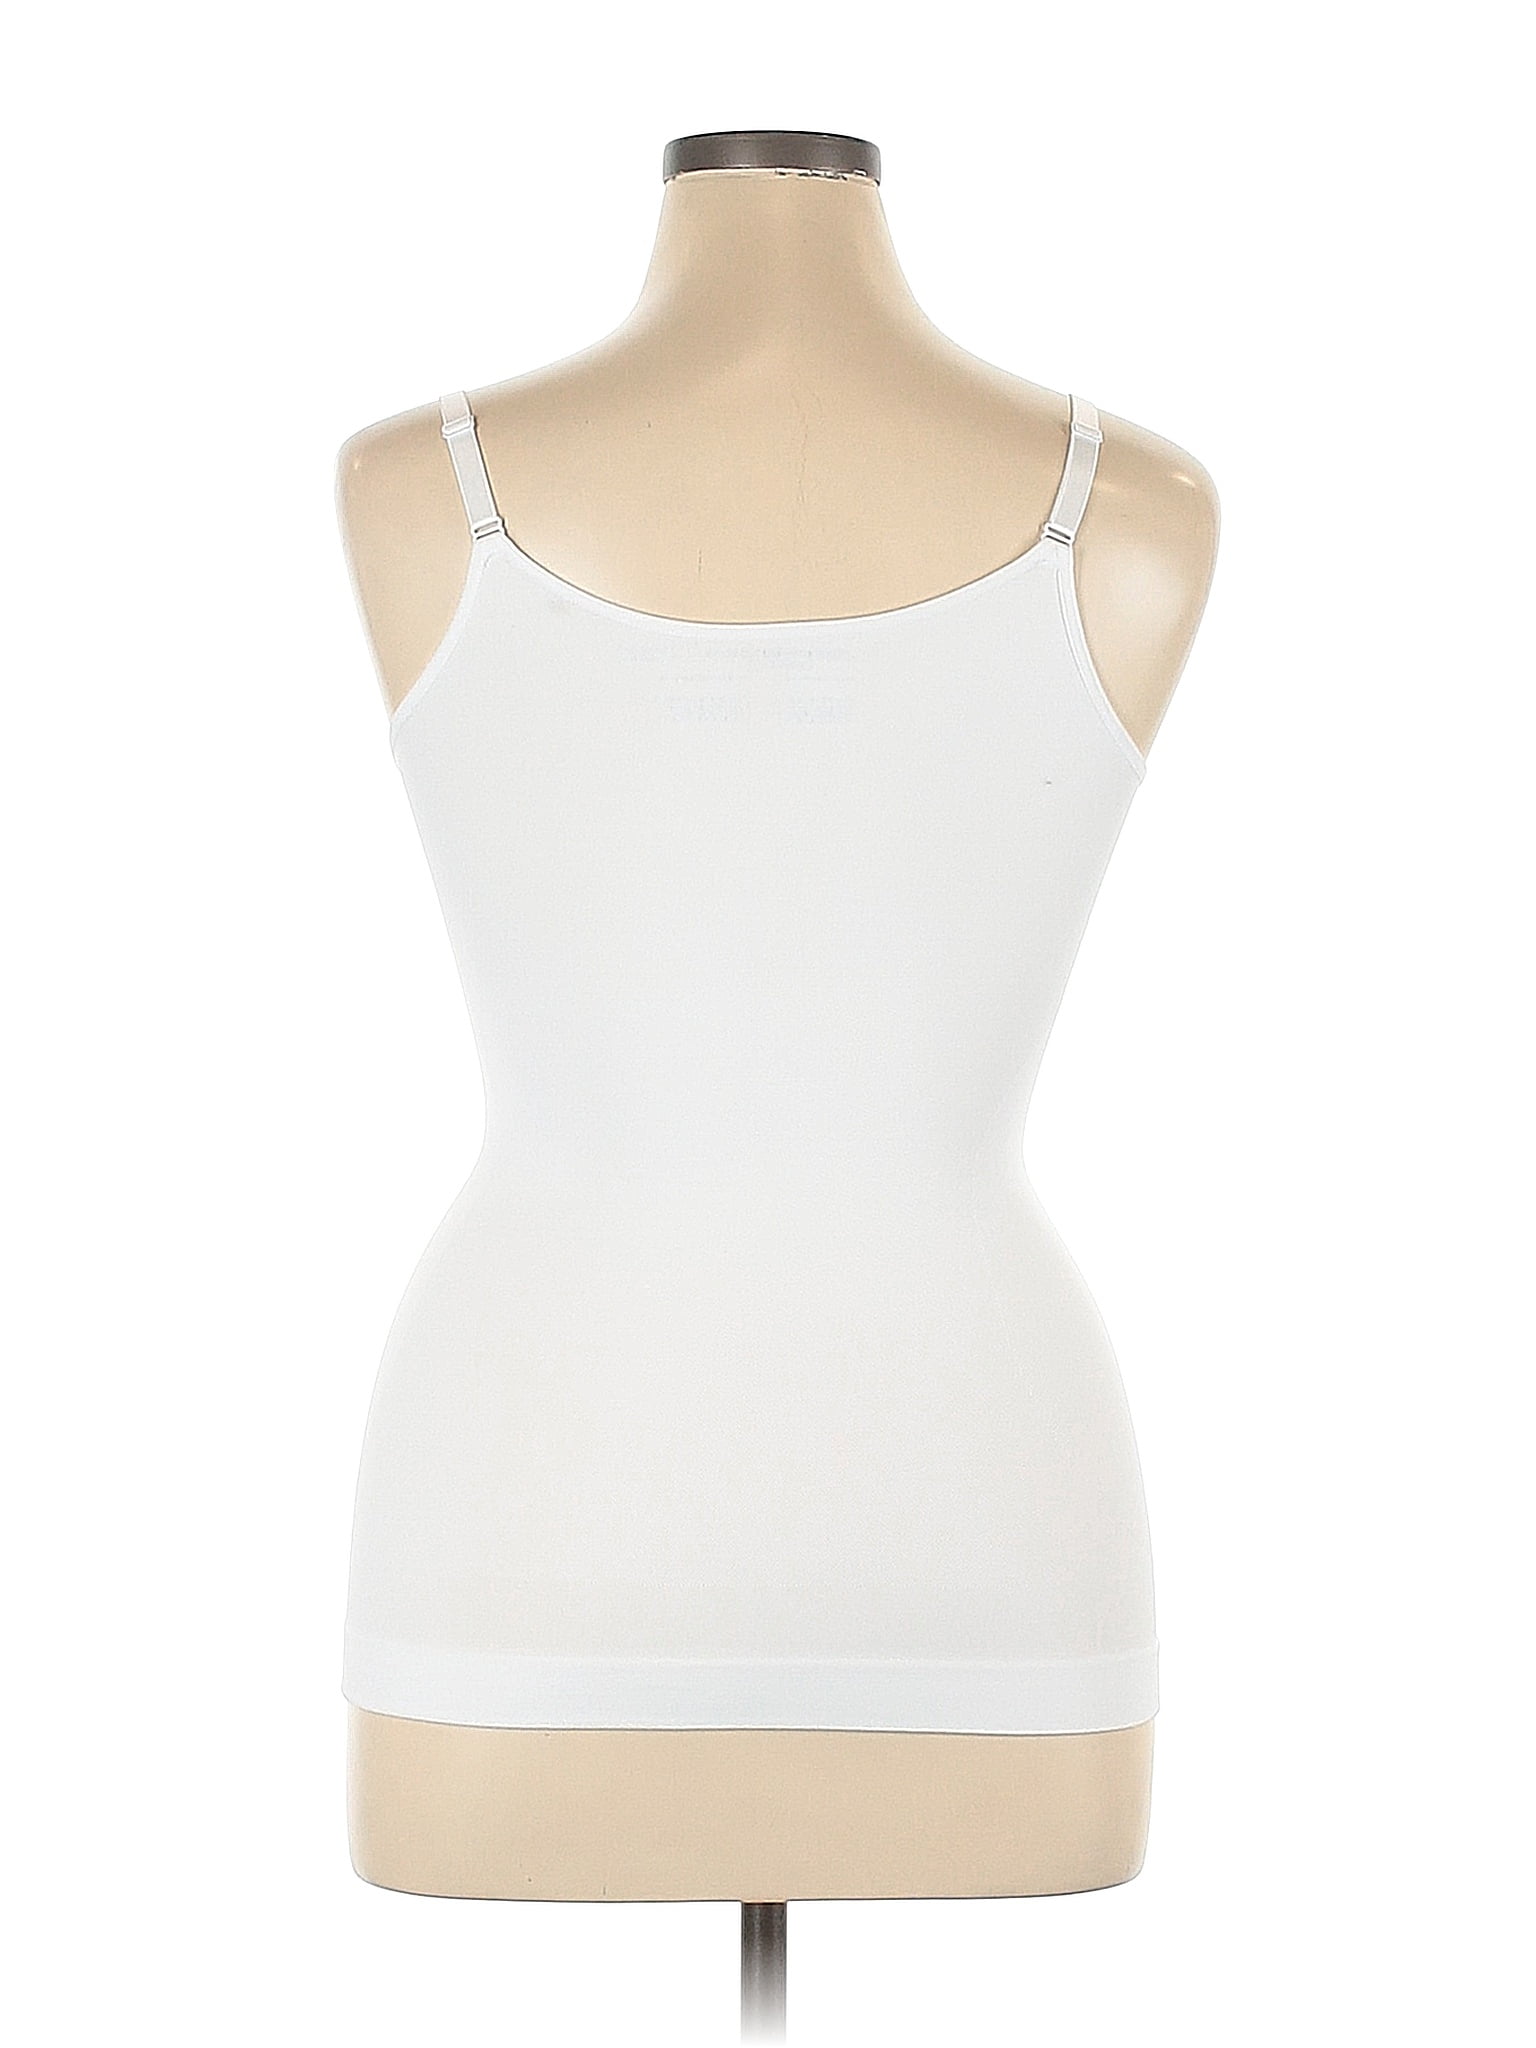 Shapermint White Tank Top Size XL - 71% off